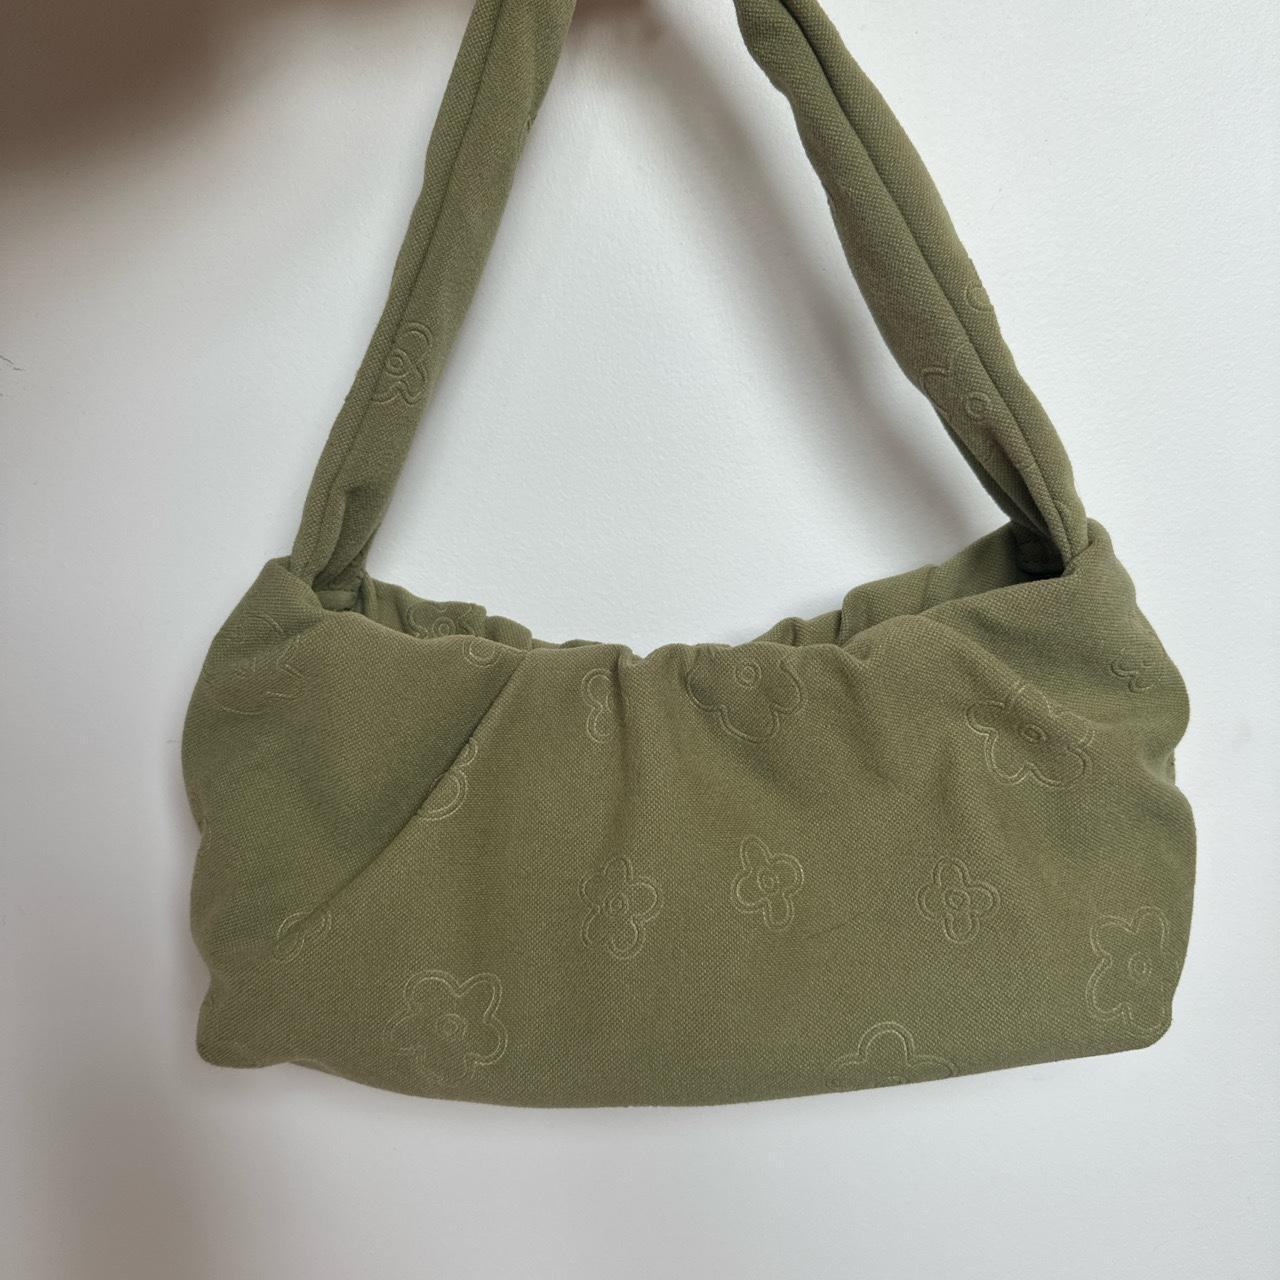 Restyle Utility Pockets Crescent Moons Gothic Punk Army Olive Green Purse  Bag | eBay